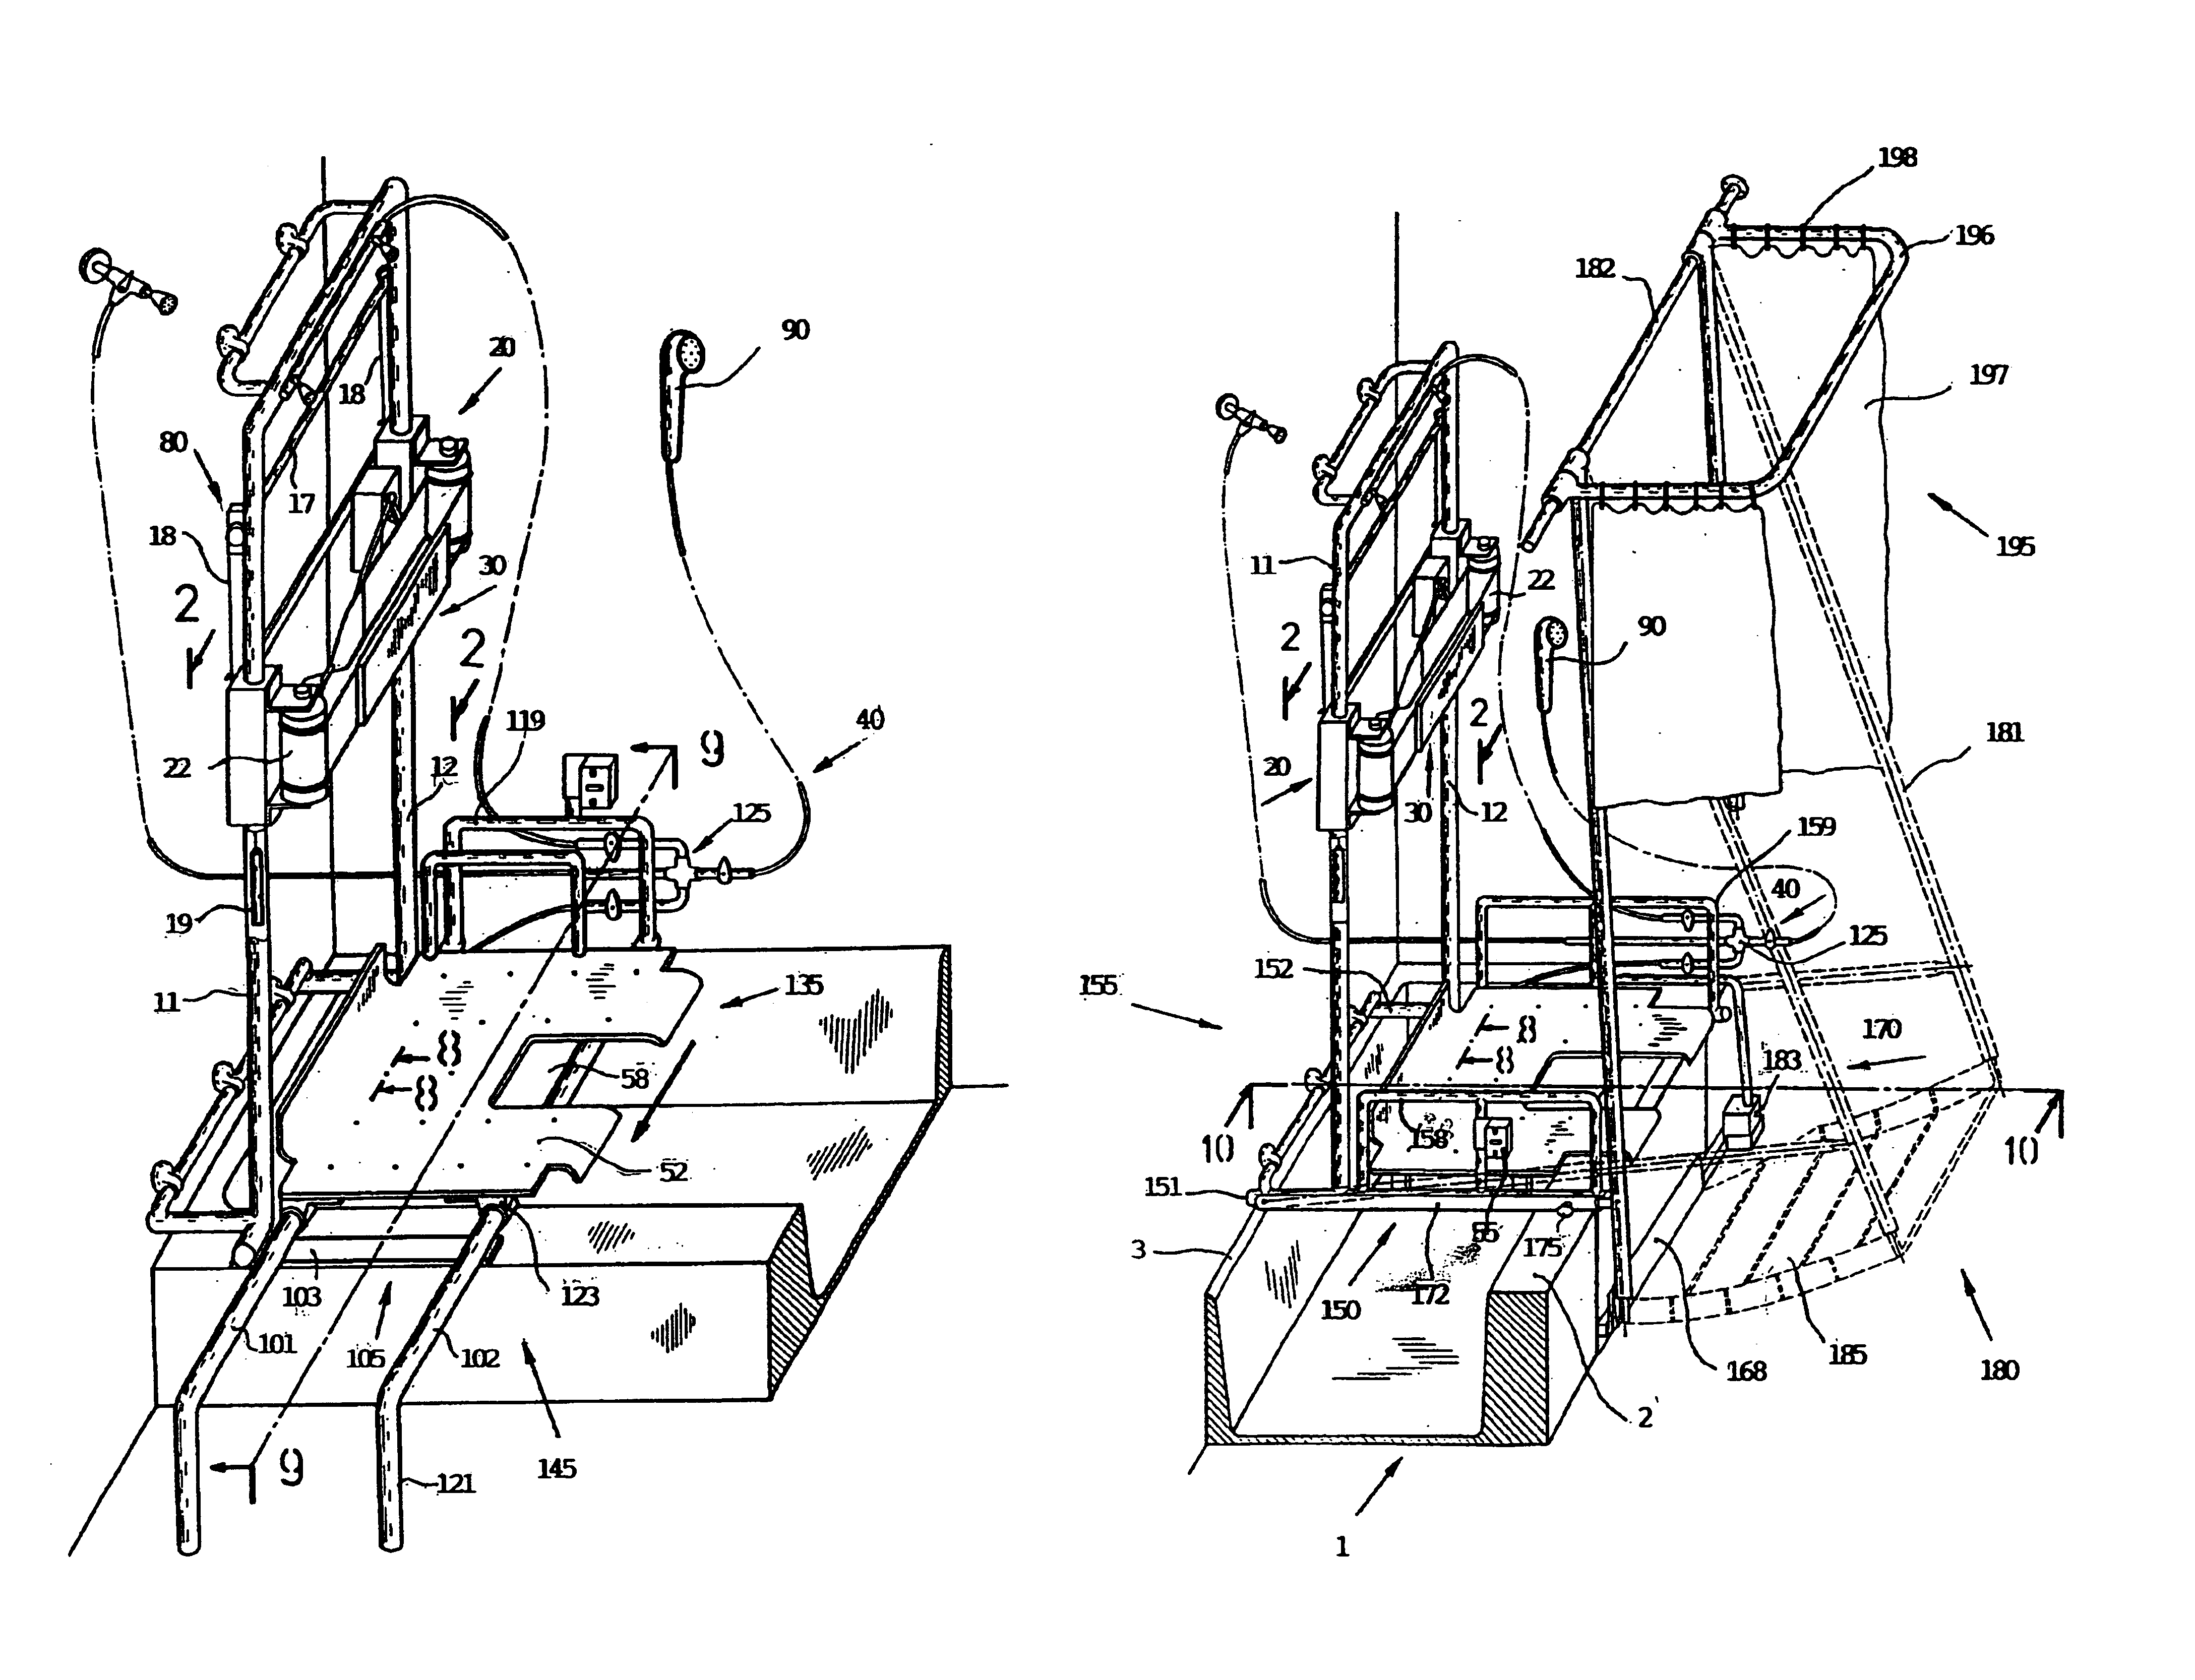 Apparatus for completely bathing oneself by users of wheelchair and an elderly, infirm people